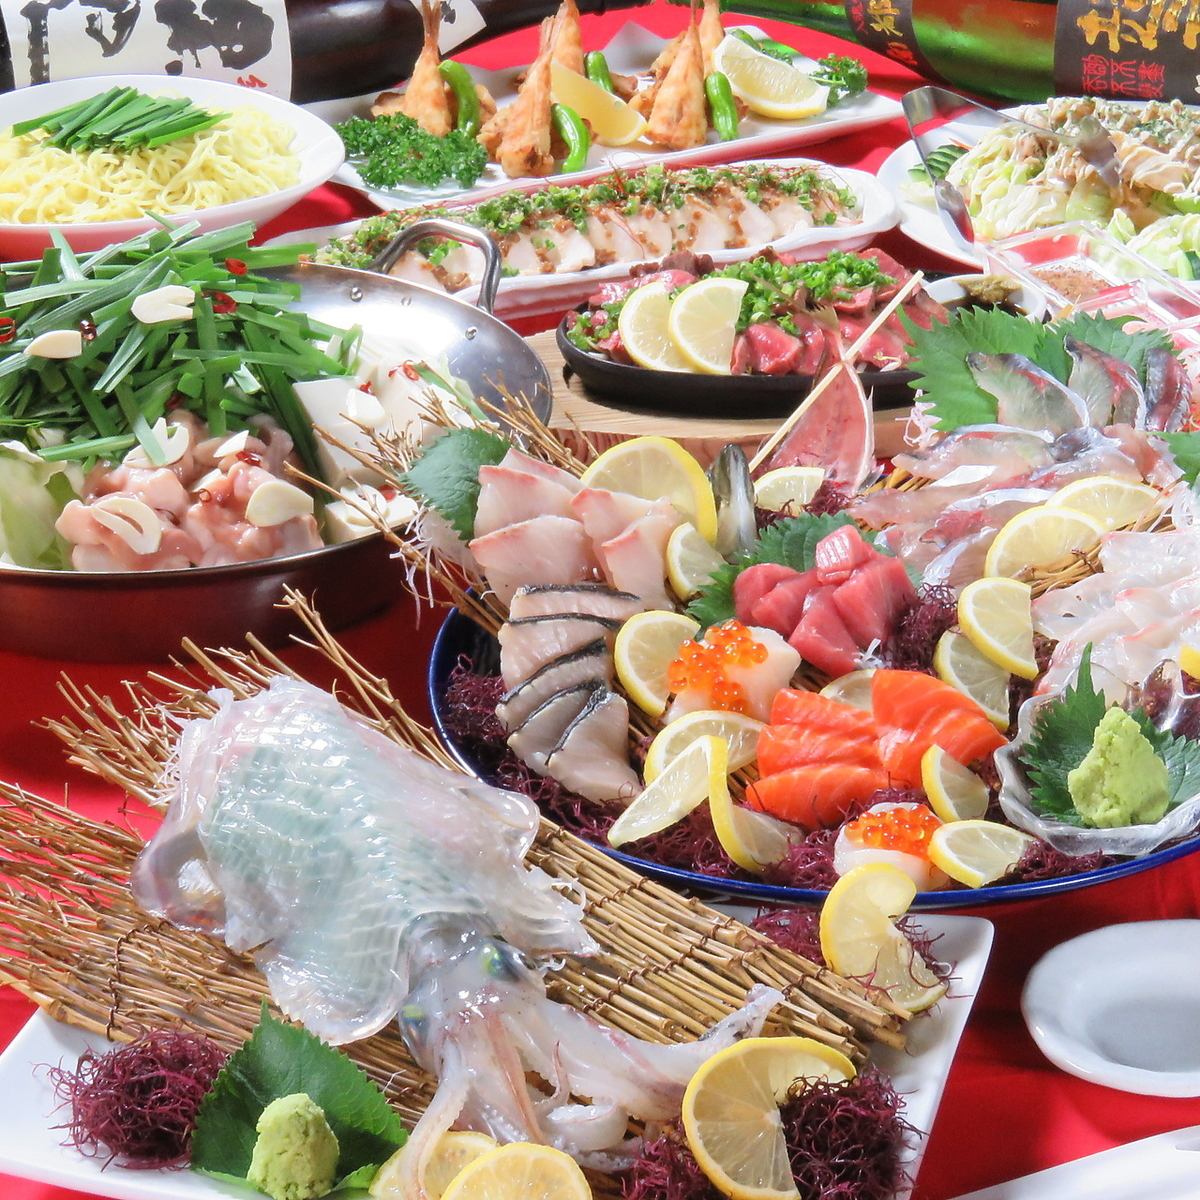 It is a store that collects the good points of Fukuoka, such as fresh fish, seafood, and Fukuoka's famous hot pot.